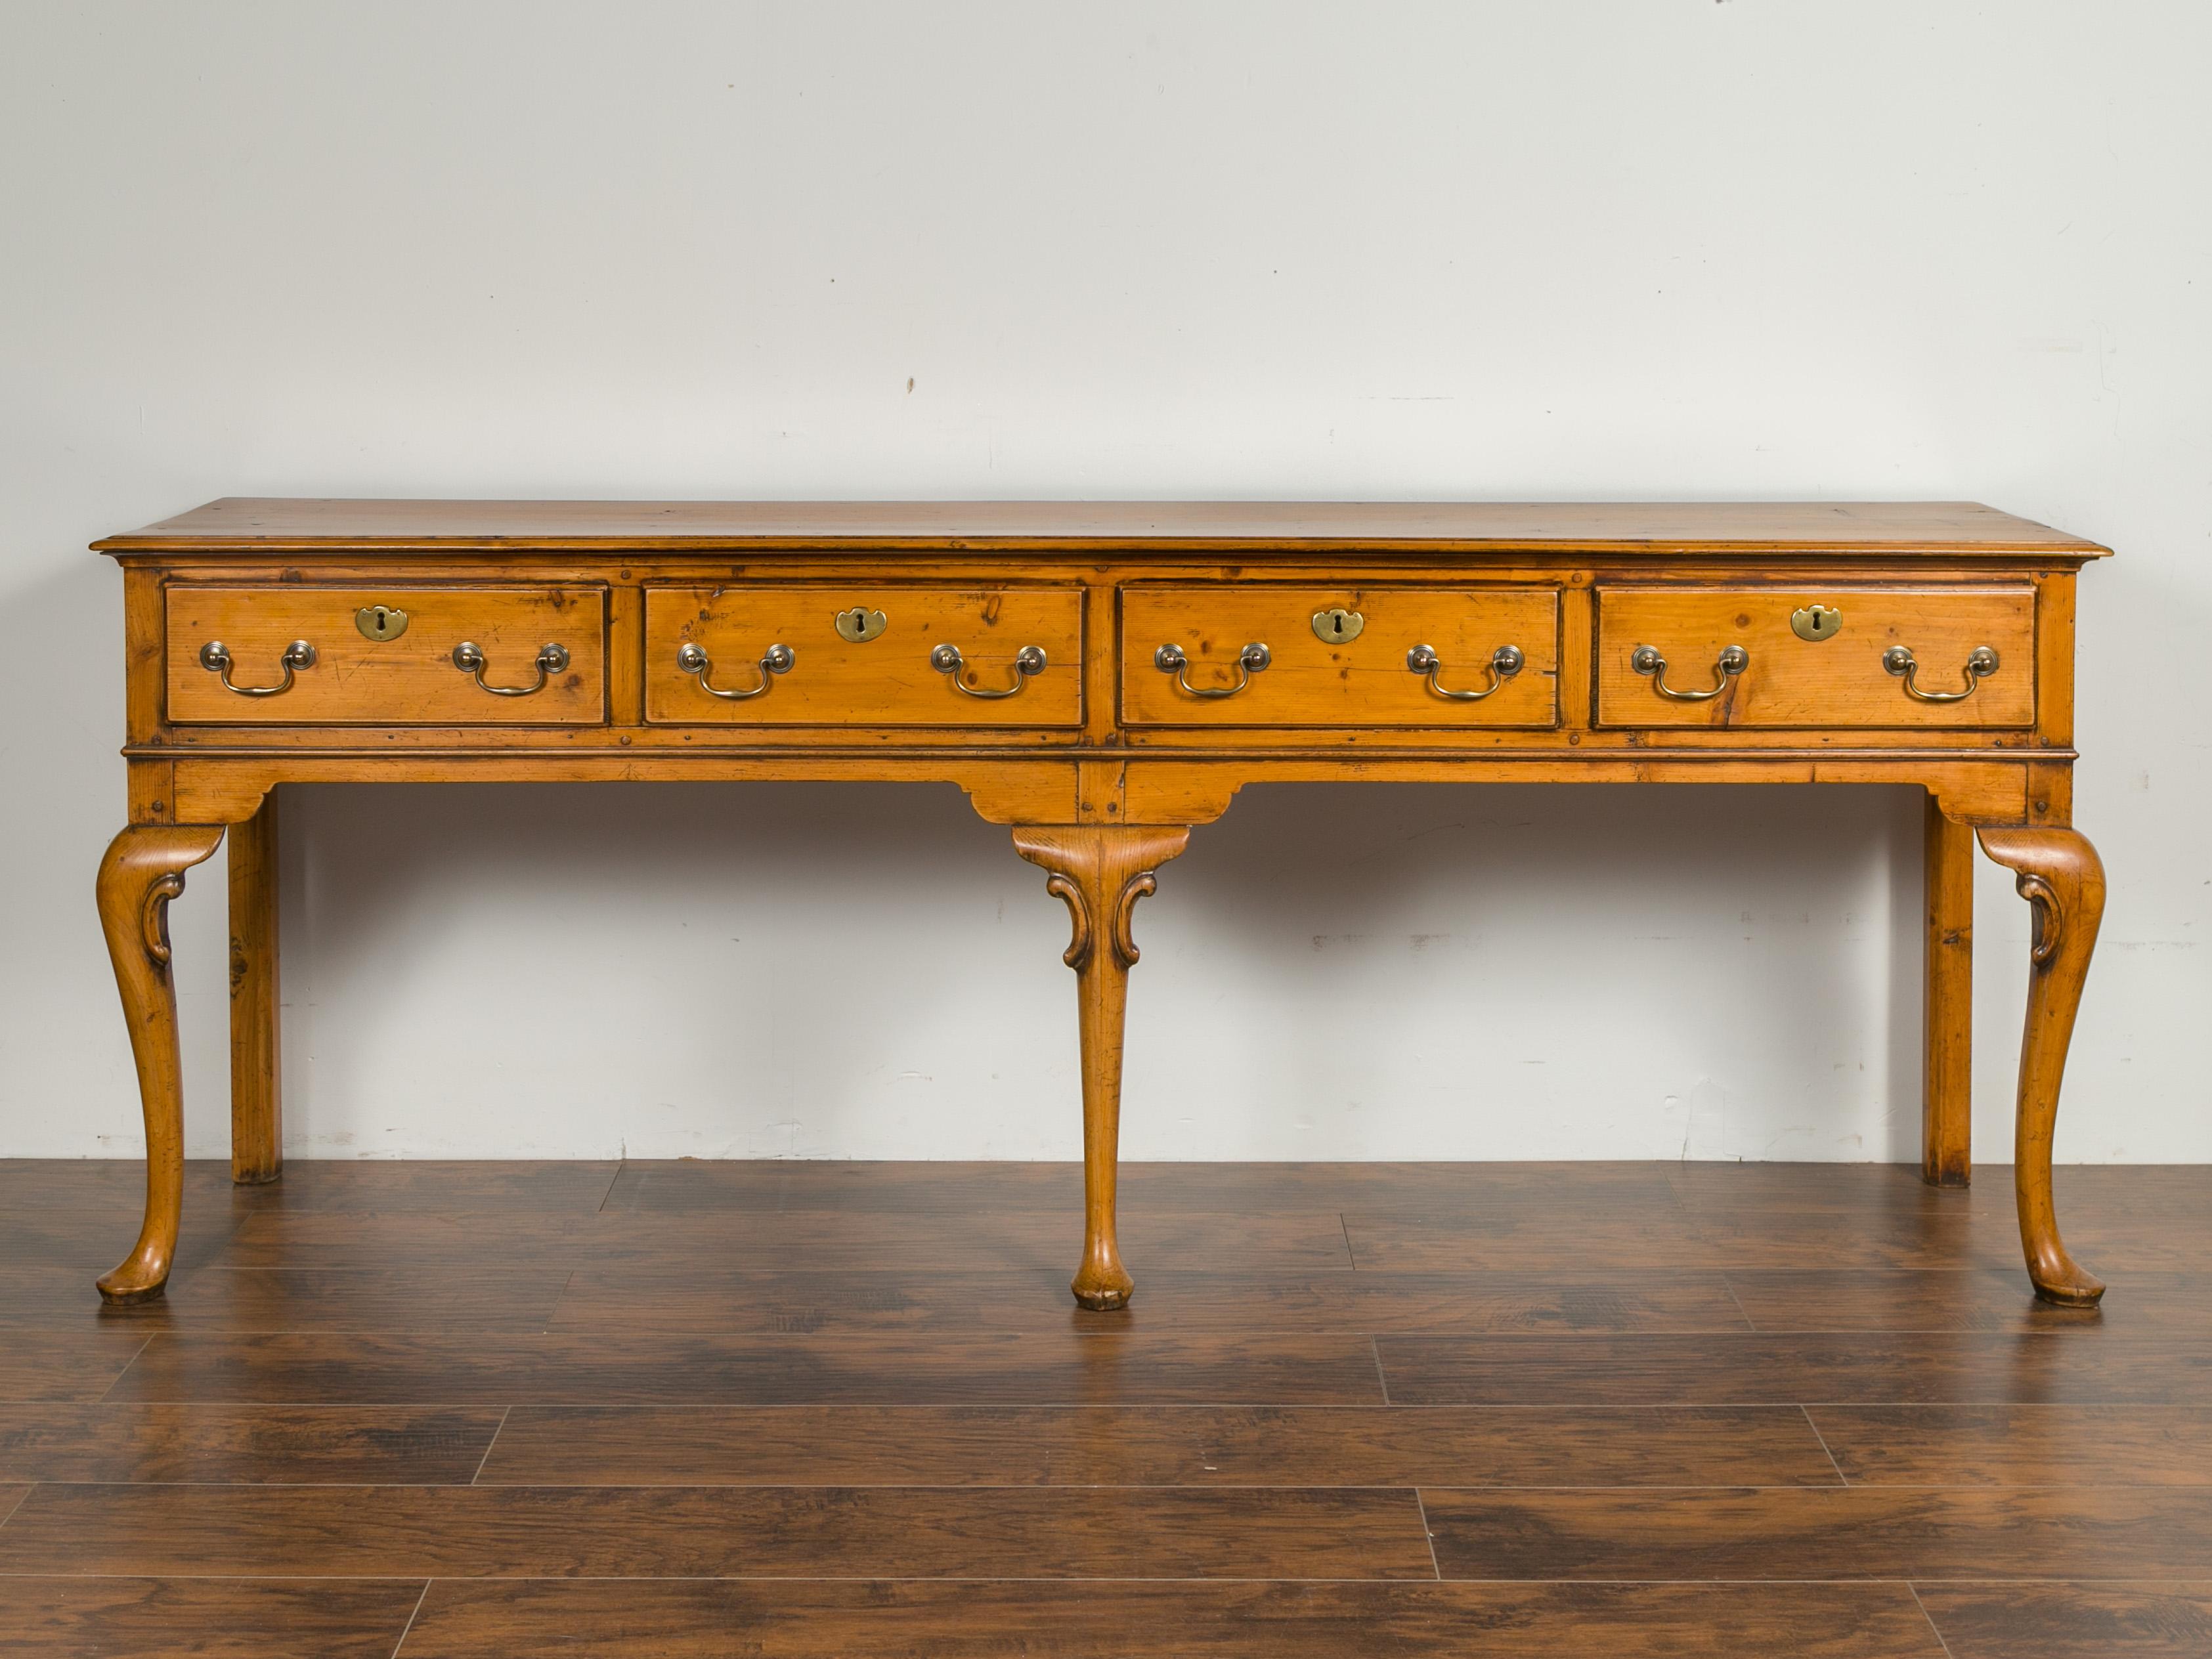 An English pine sideboard from the early 20th century, with four drawers and cabriole legs. Crafted in England during the early 1900s, this pine sideboard, which used to be a dresser base, features a rectangular top with beveled edges, sitting above